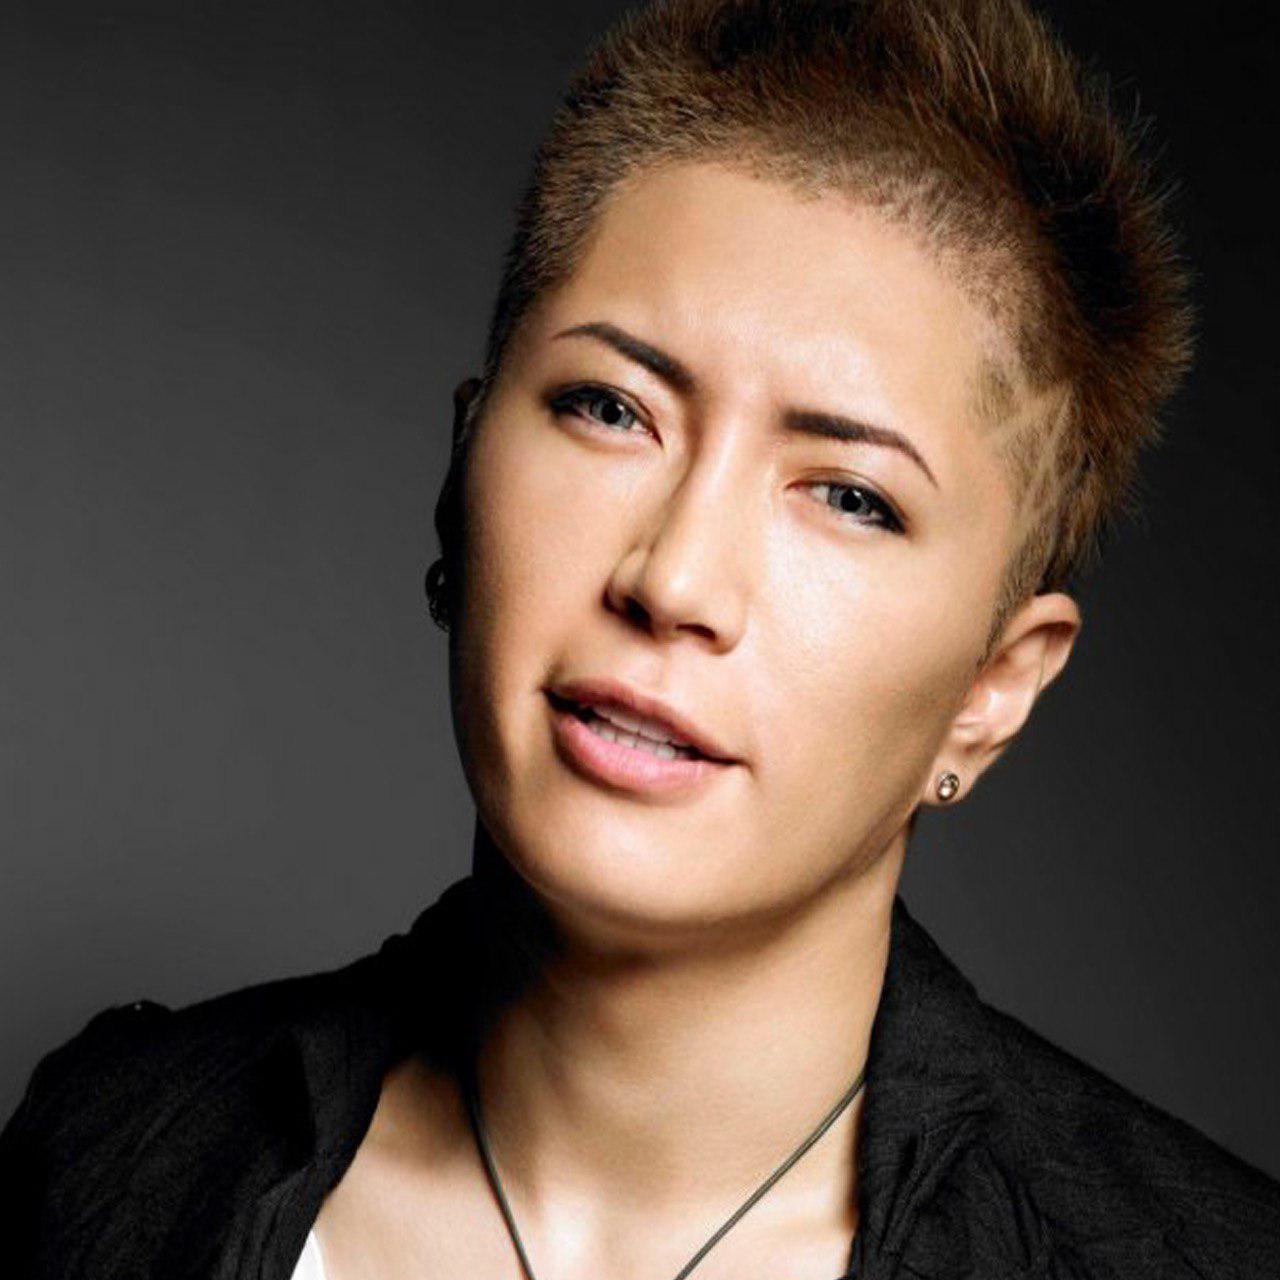 J Pop Star Gackt Caught Between Crypto Company Spindle And